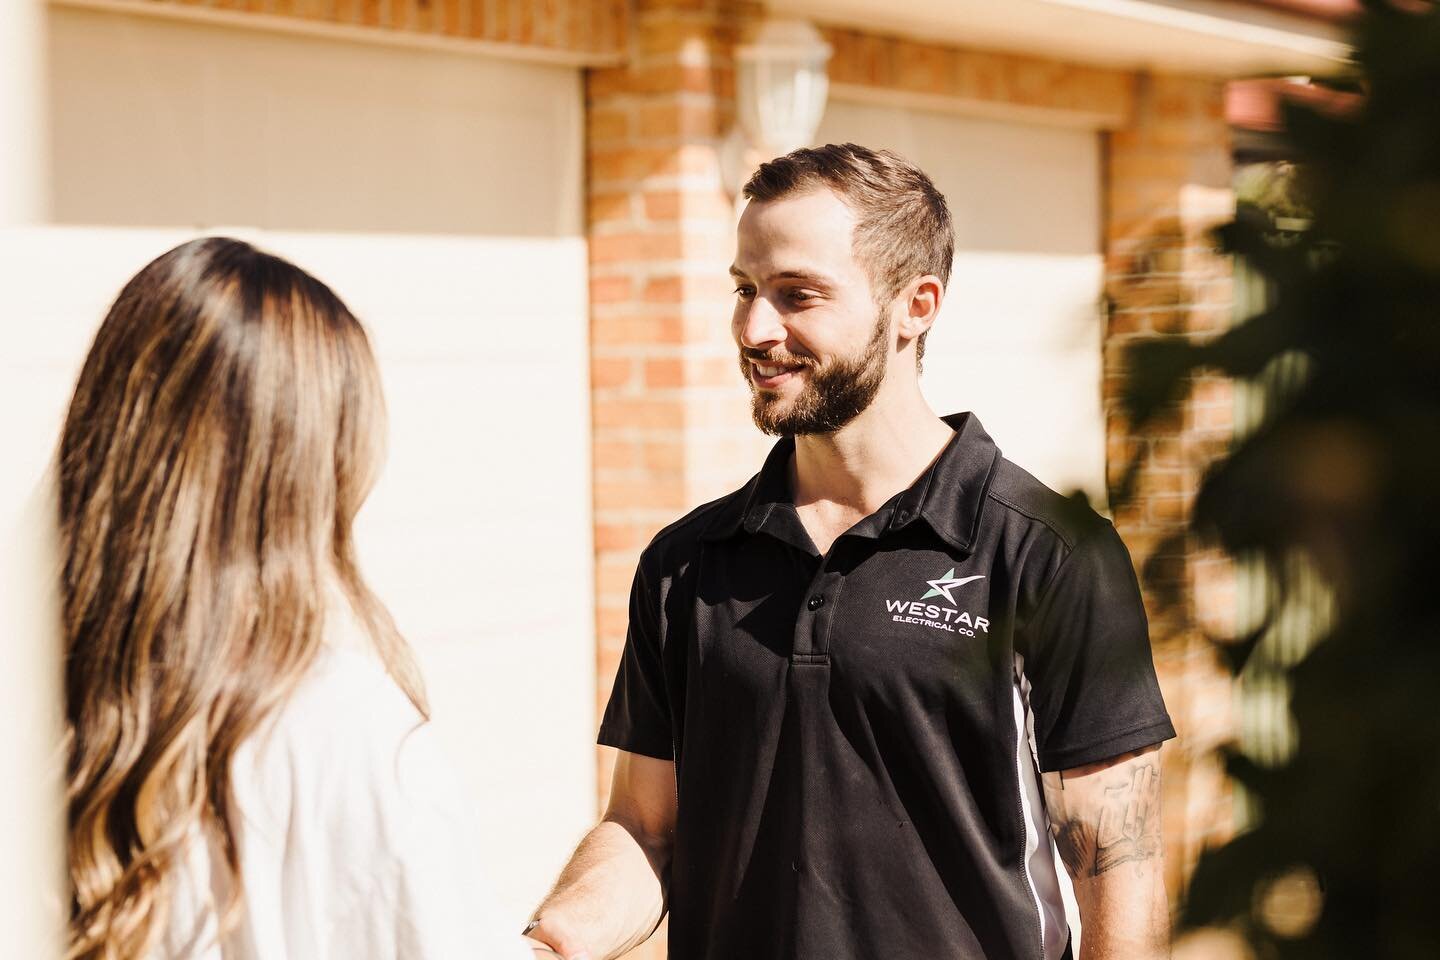 We are so ready to meet you - whatever your electrical needs are we are excited to work with you to bring your vision to life. 

Reach out today for a chat! Contact us via DM, head to www.westarelectrical.co or click the link in our bio for more info